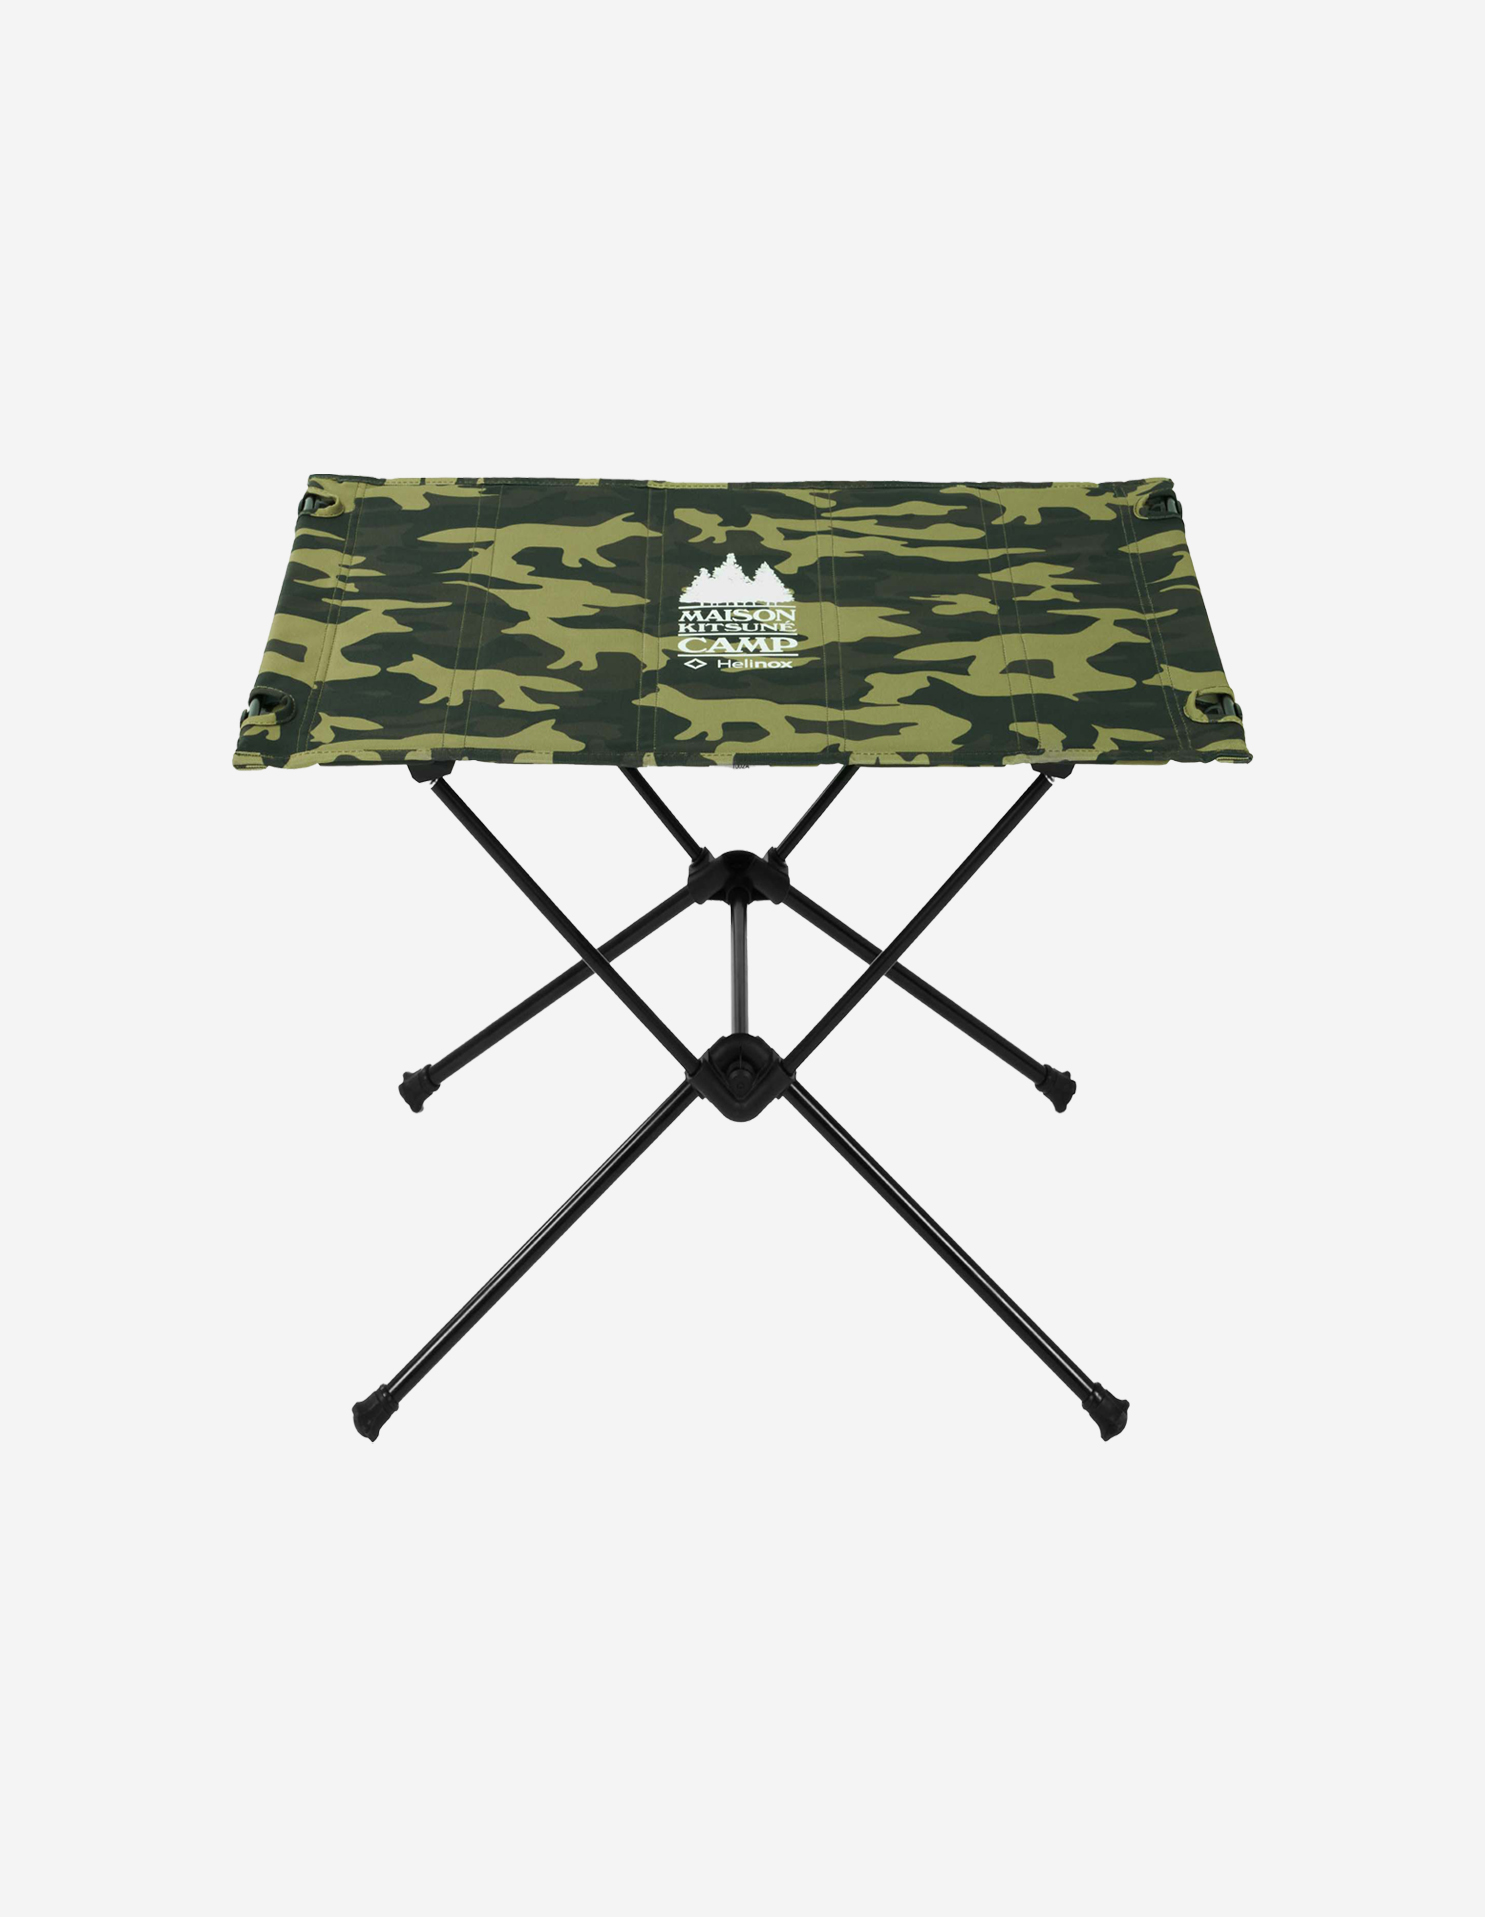 Helinox x Maison kitsune Table M (with Strap & Pouch)